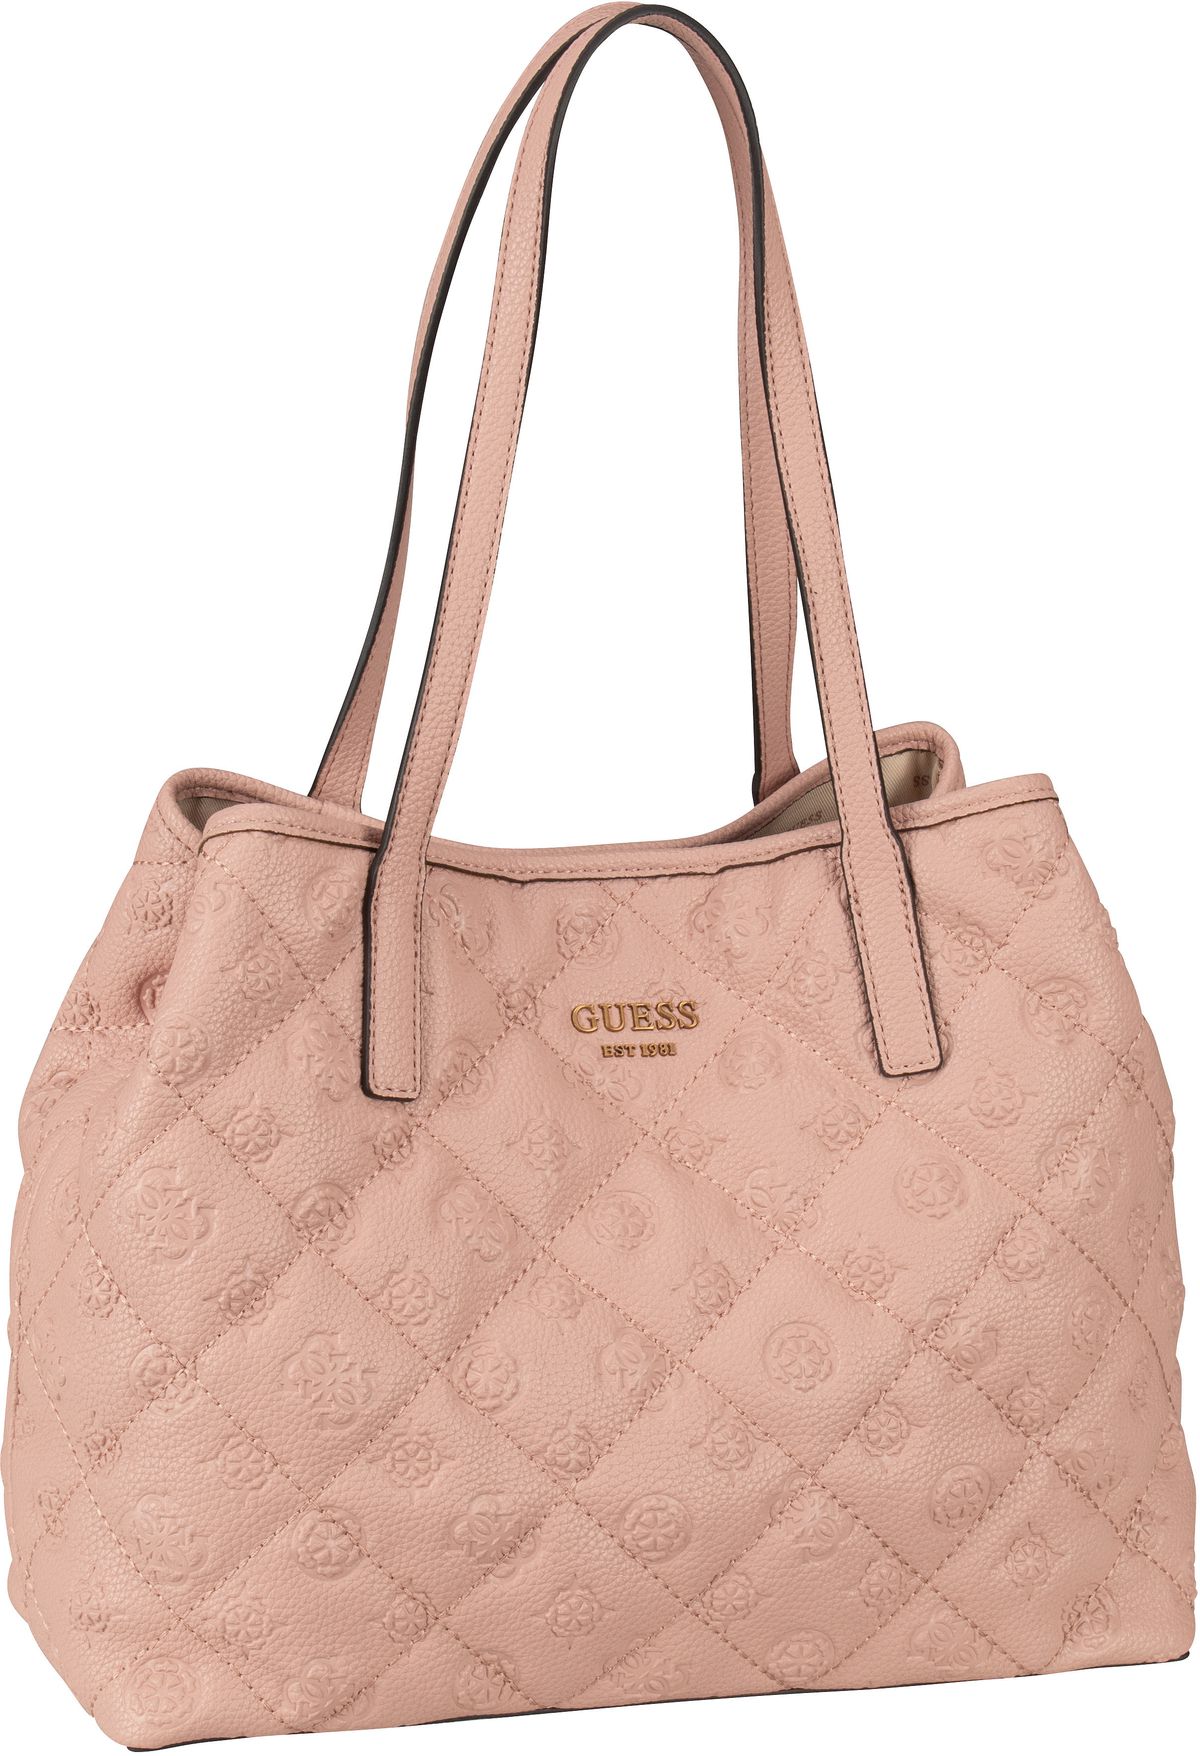 Guess Vikky Tote Quilted  in Rosé (15.6 Liter), Shopper